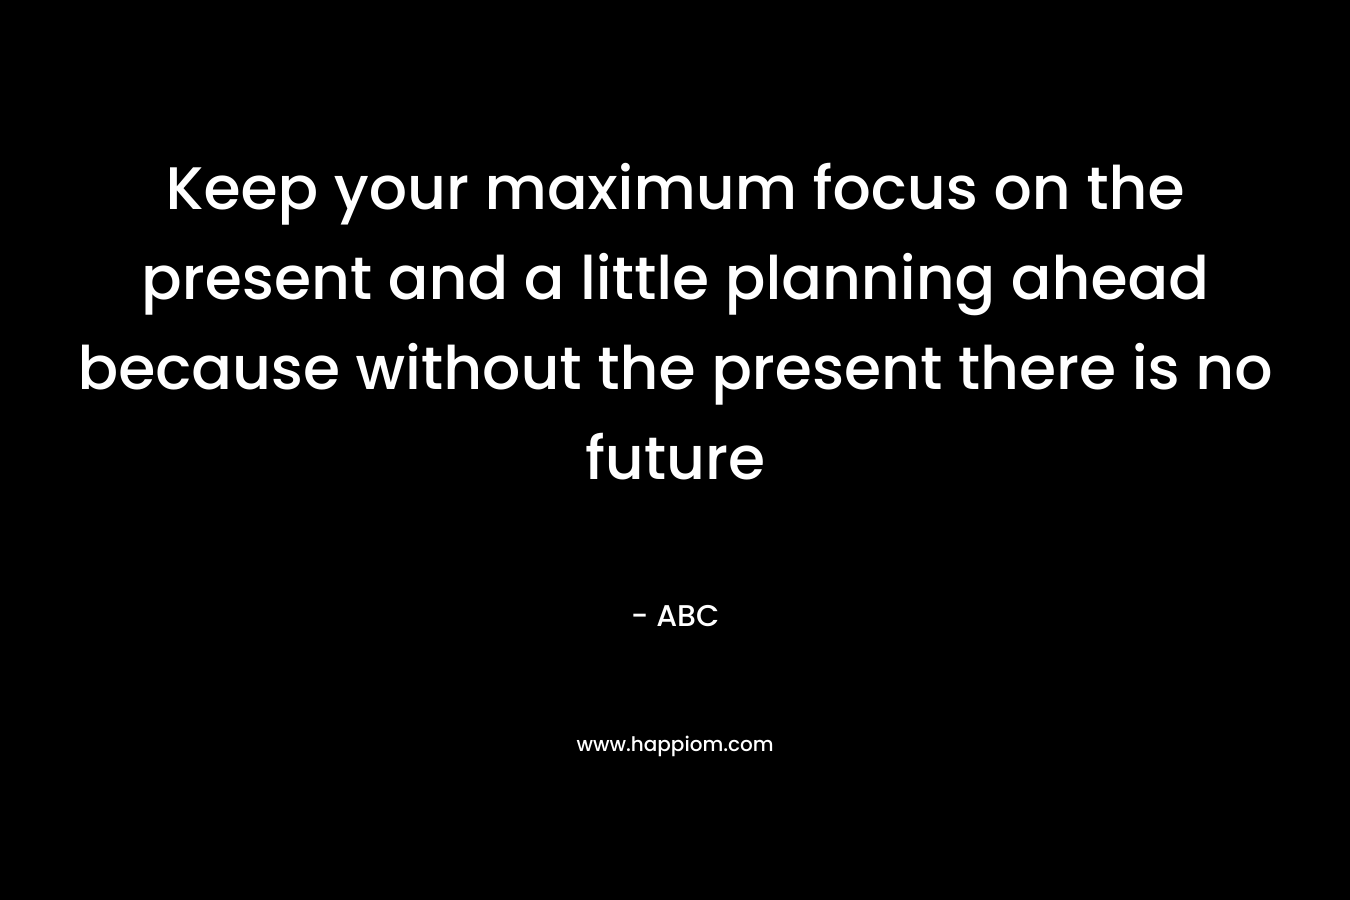 Keep your maximum focus on the present and a little planning ahead because without the present there is no future